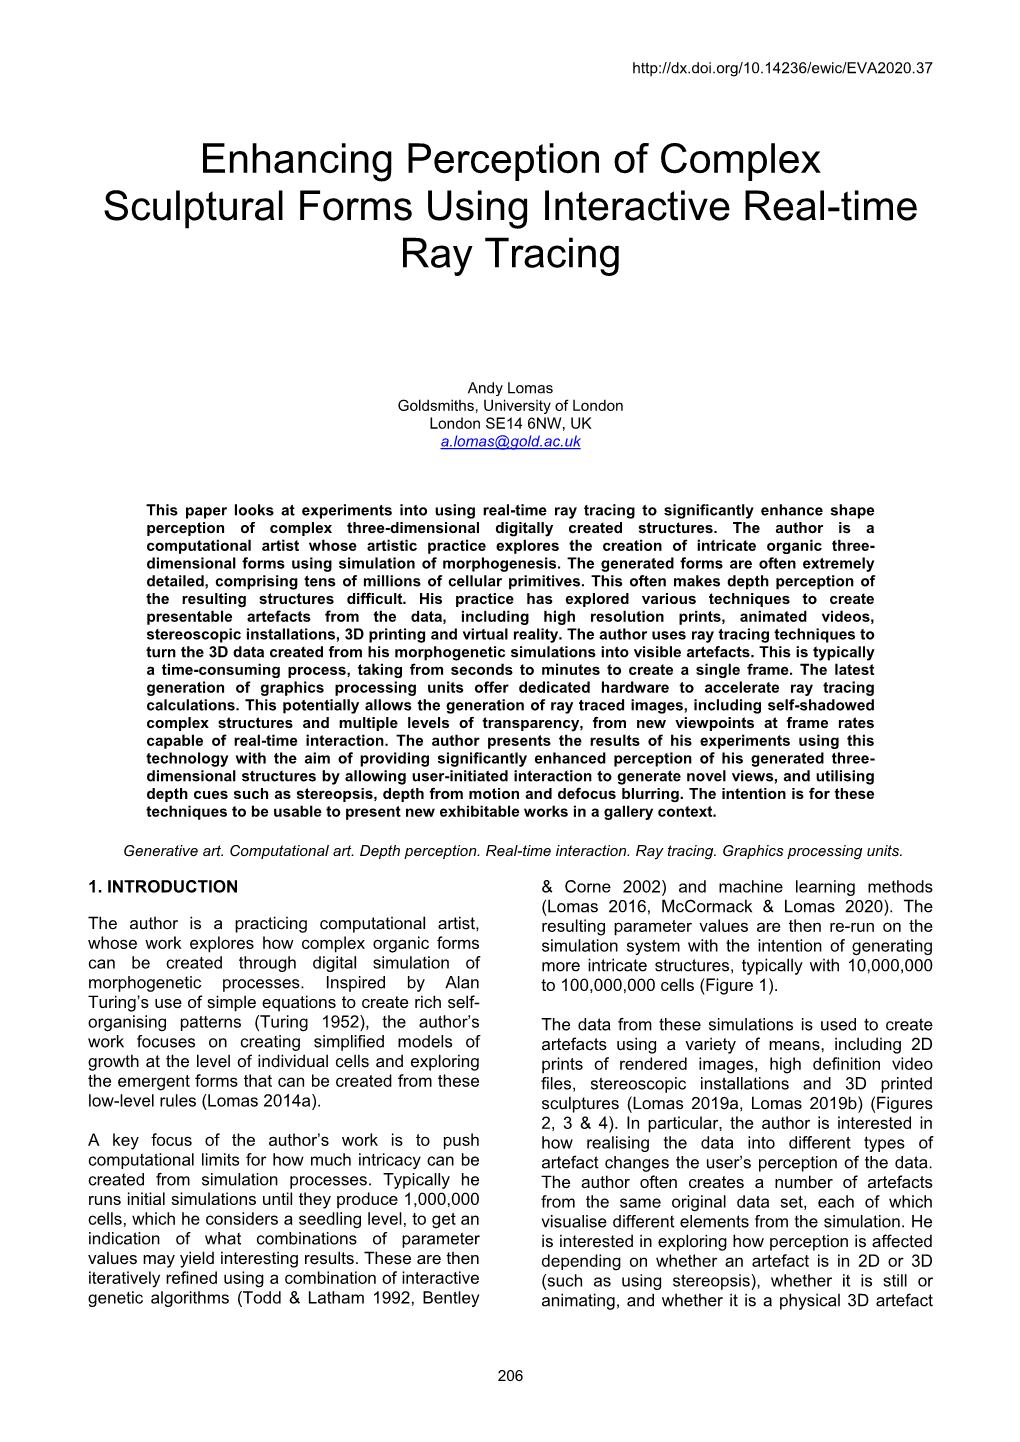 Enhancing Perception of Complex Sculptural Forms Using Interactive Real-Time Ray Tracing